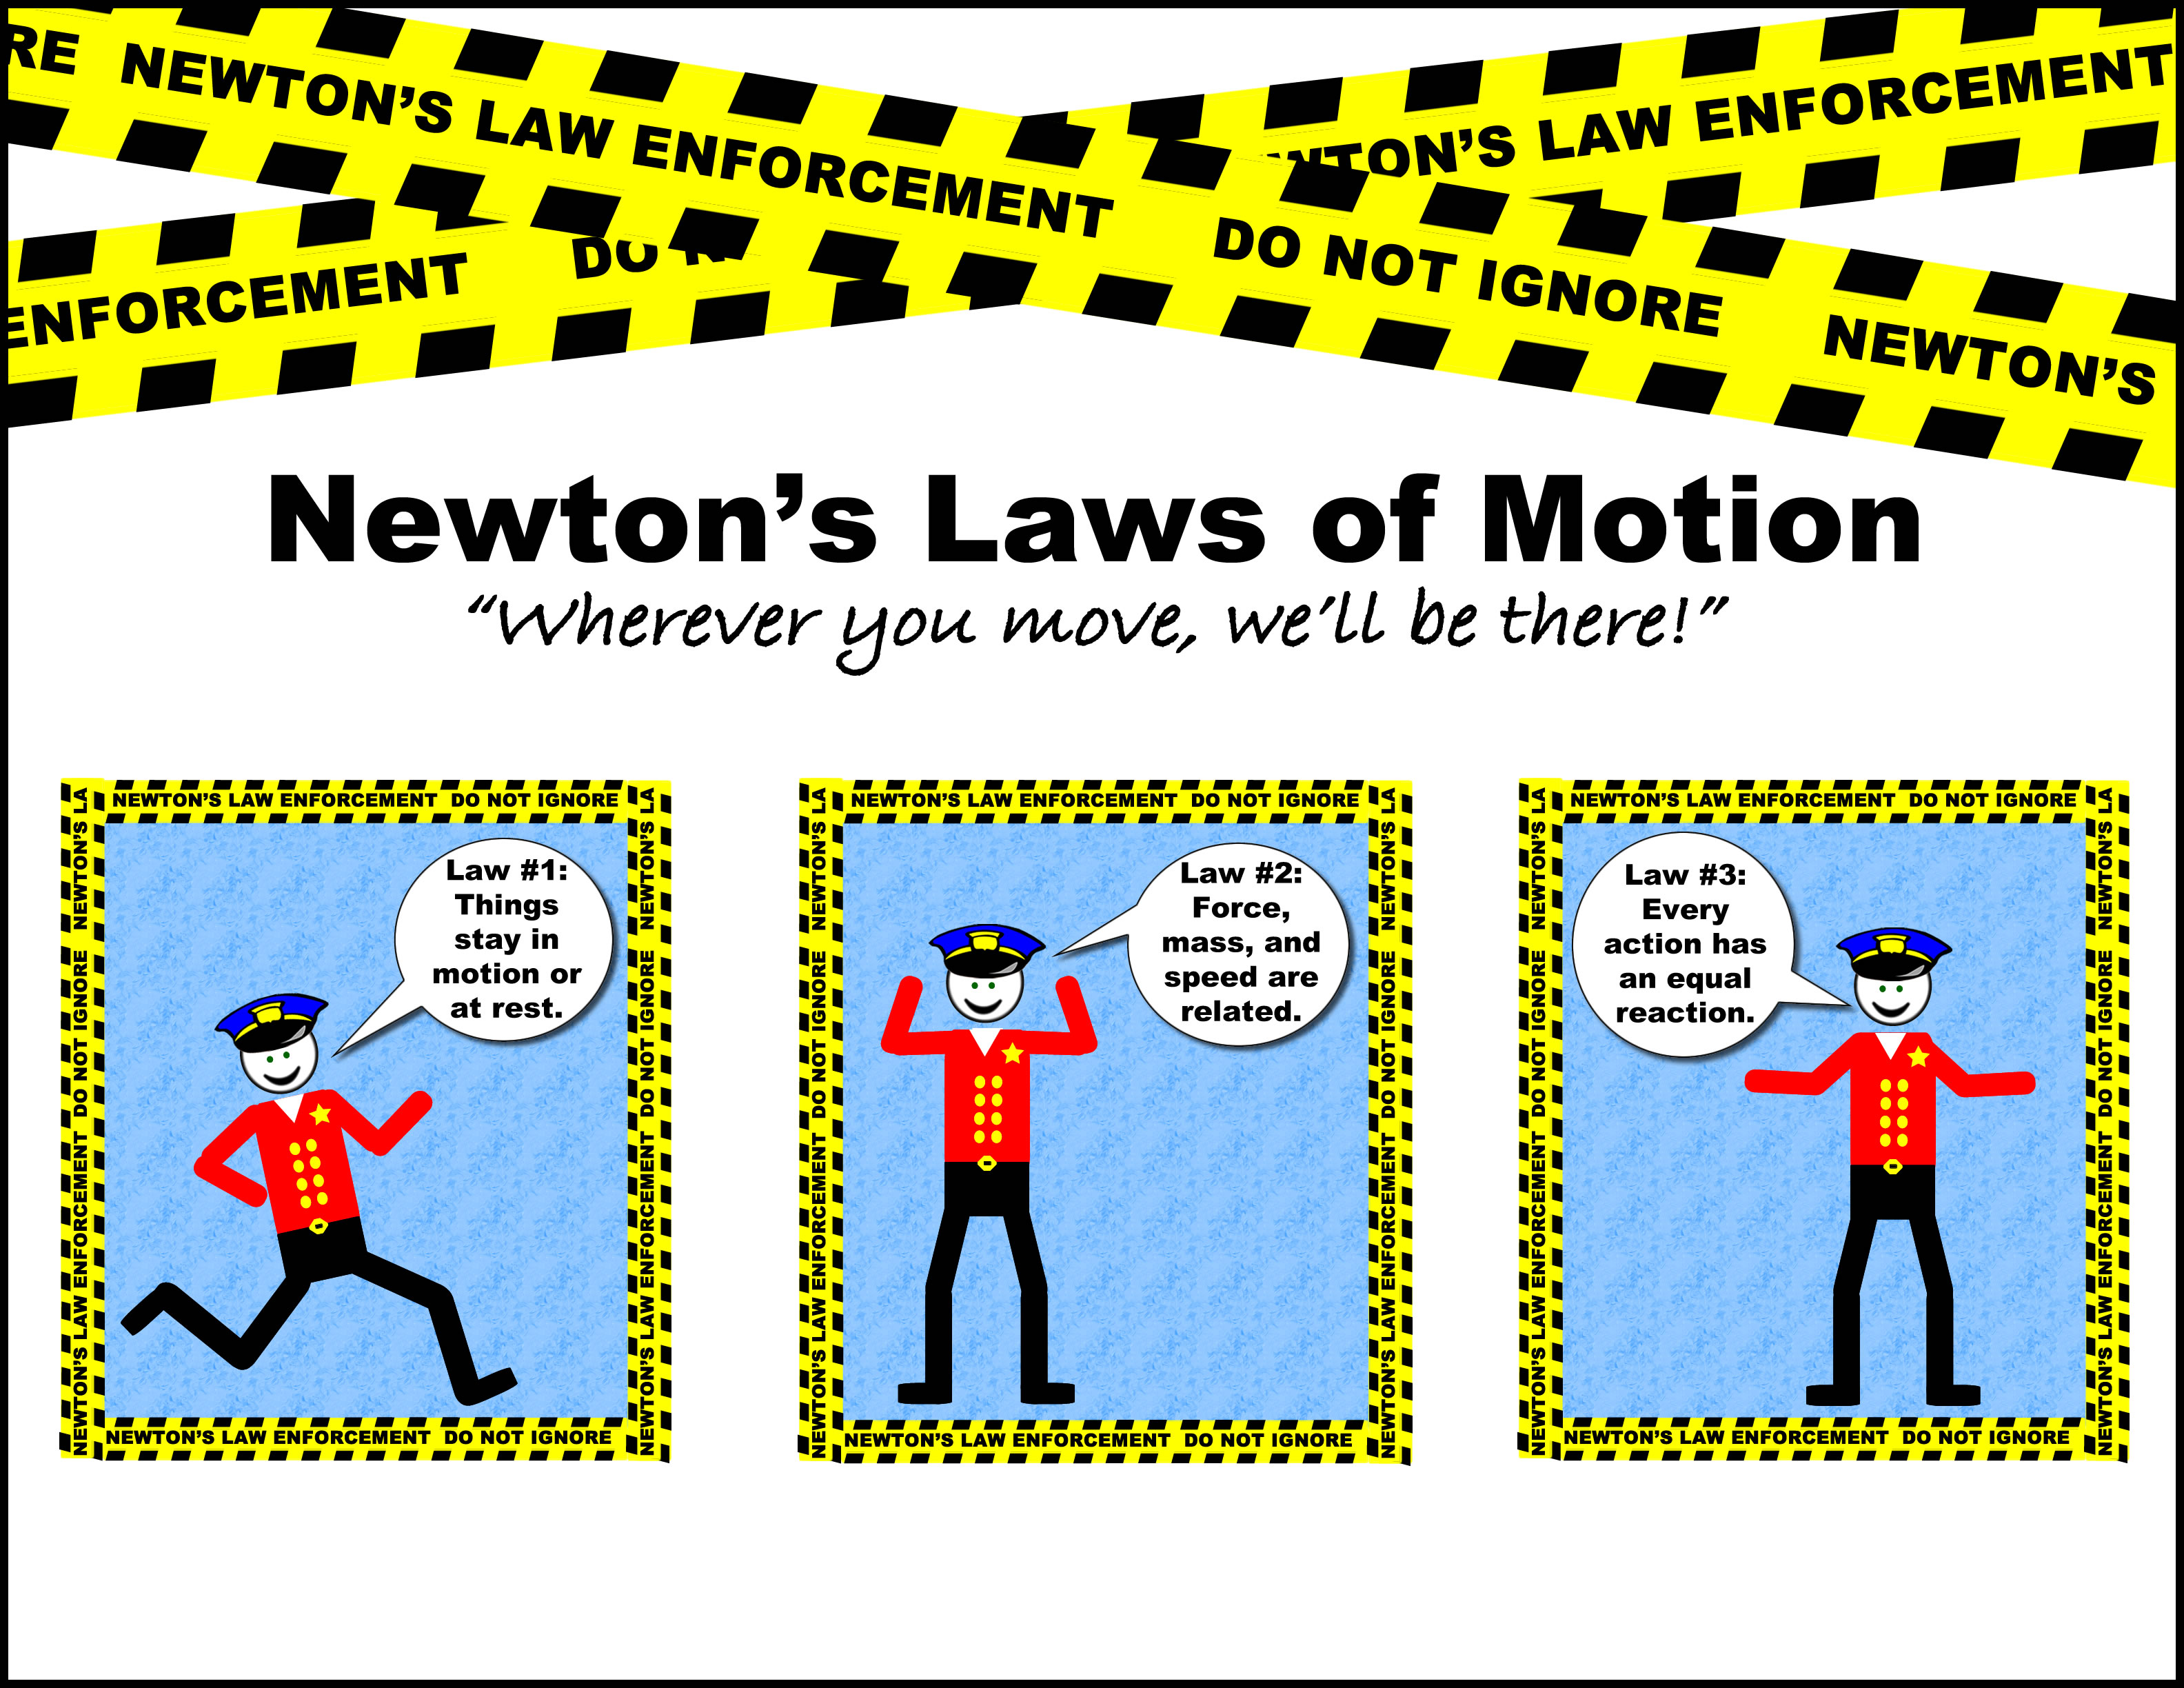 2nd law of motion